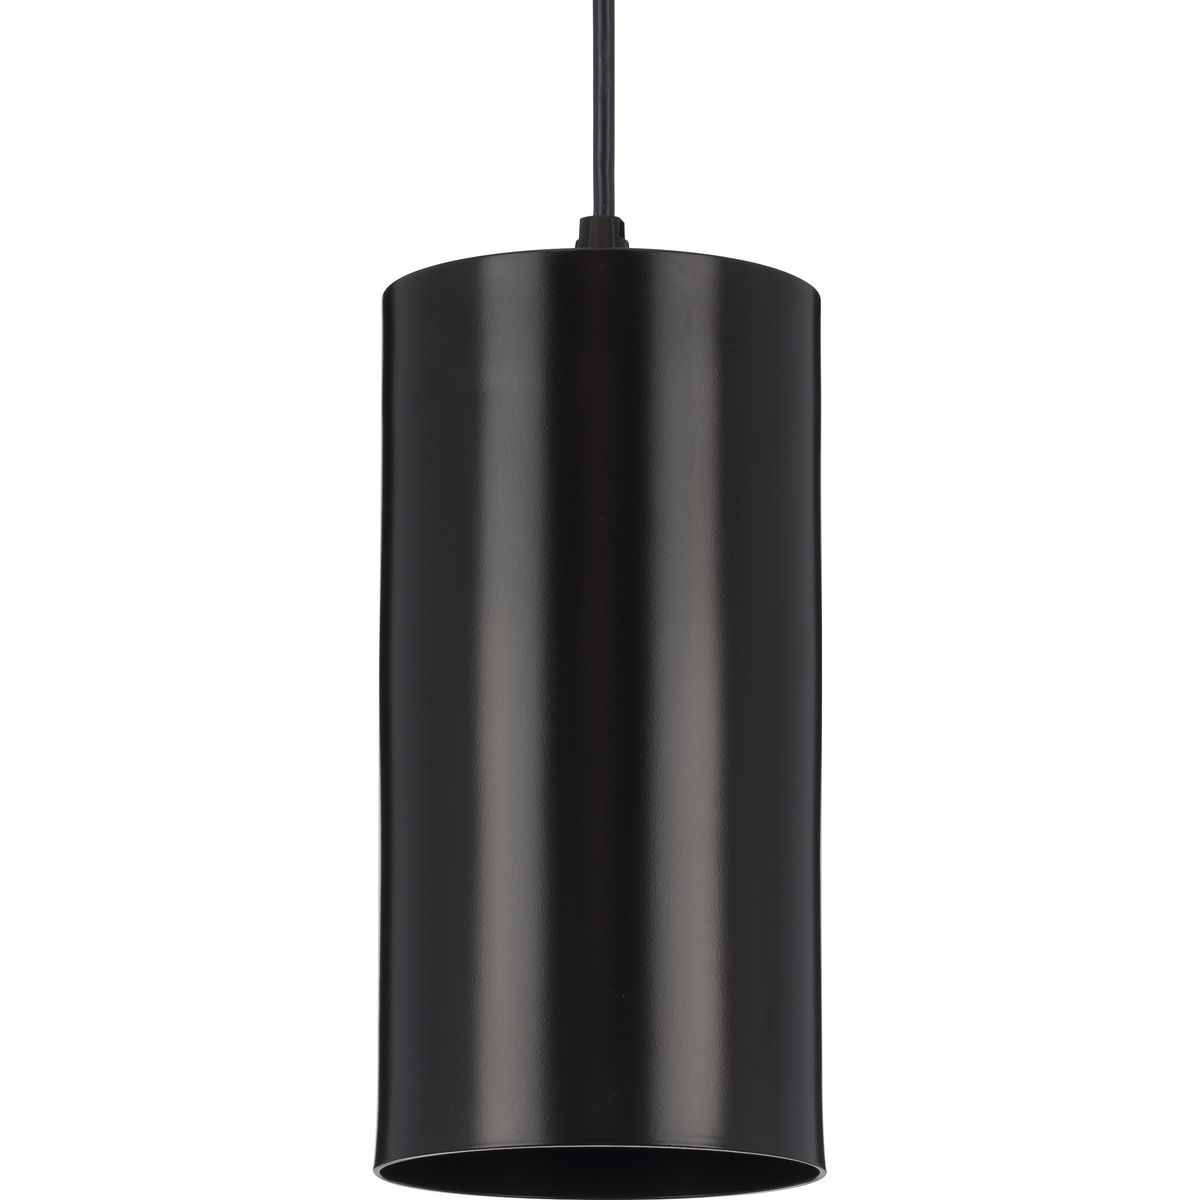 Cyl Rnds 6" Outdoor Pendant